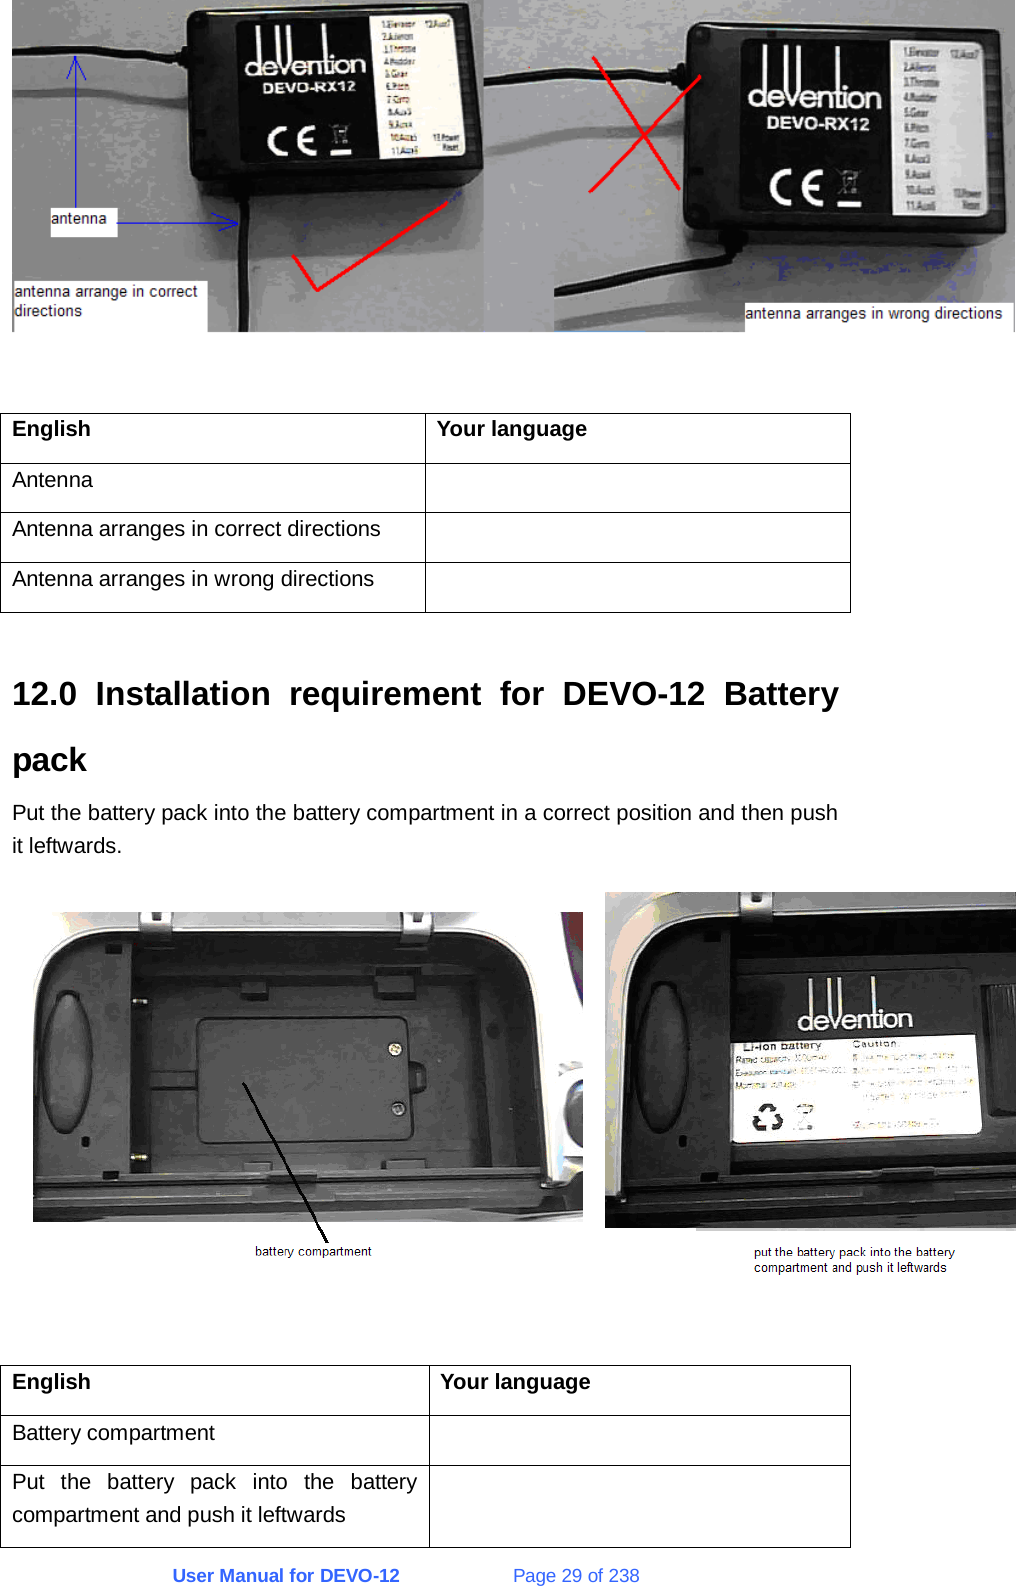 User Manual for DEVO-12             Page 29 of 238   English Your language Antenna  Antenna arranges in correct directions   Antenna arranges in wrong directions    12.0 Installation requirement for DEVO-12 Battery pack Put the battery pack into the battery compartment in a correct position and then push it leftwards.   English Your language Battery compartment   Put the battery pack into the battery compartment and push it leftwards  